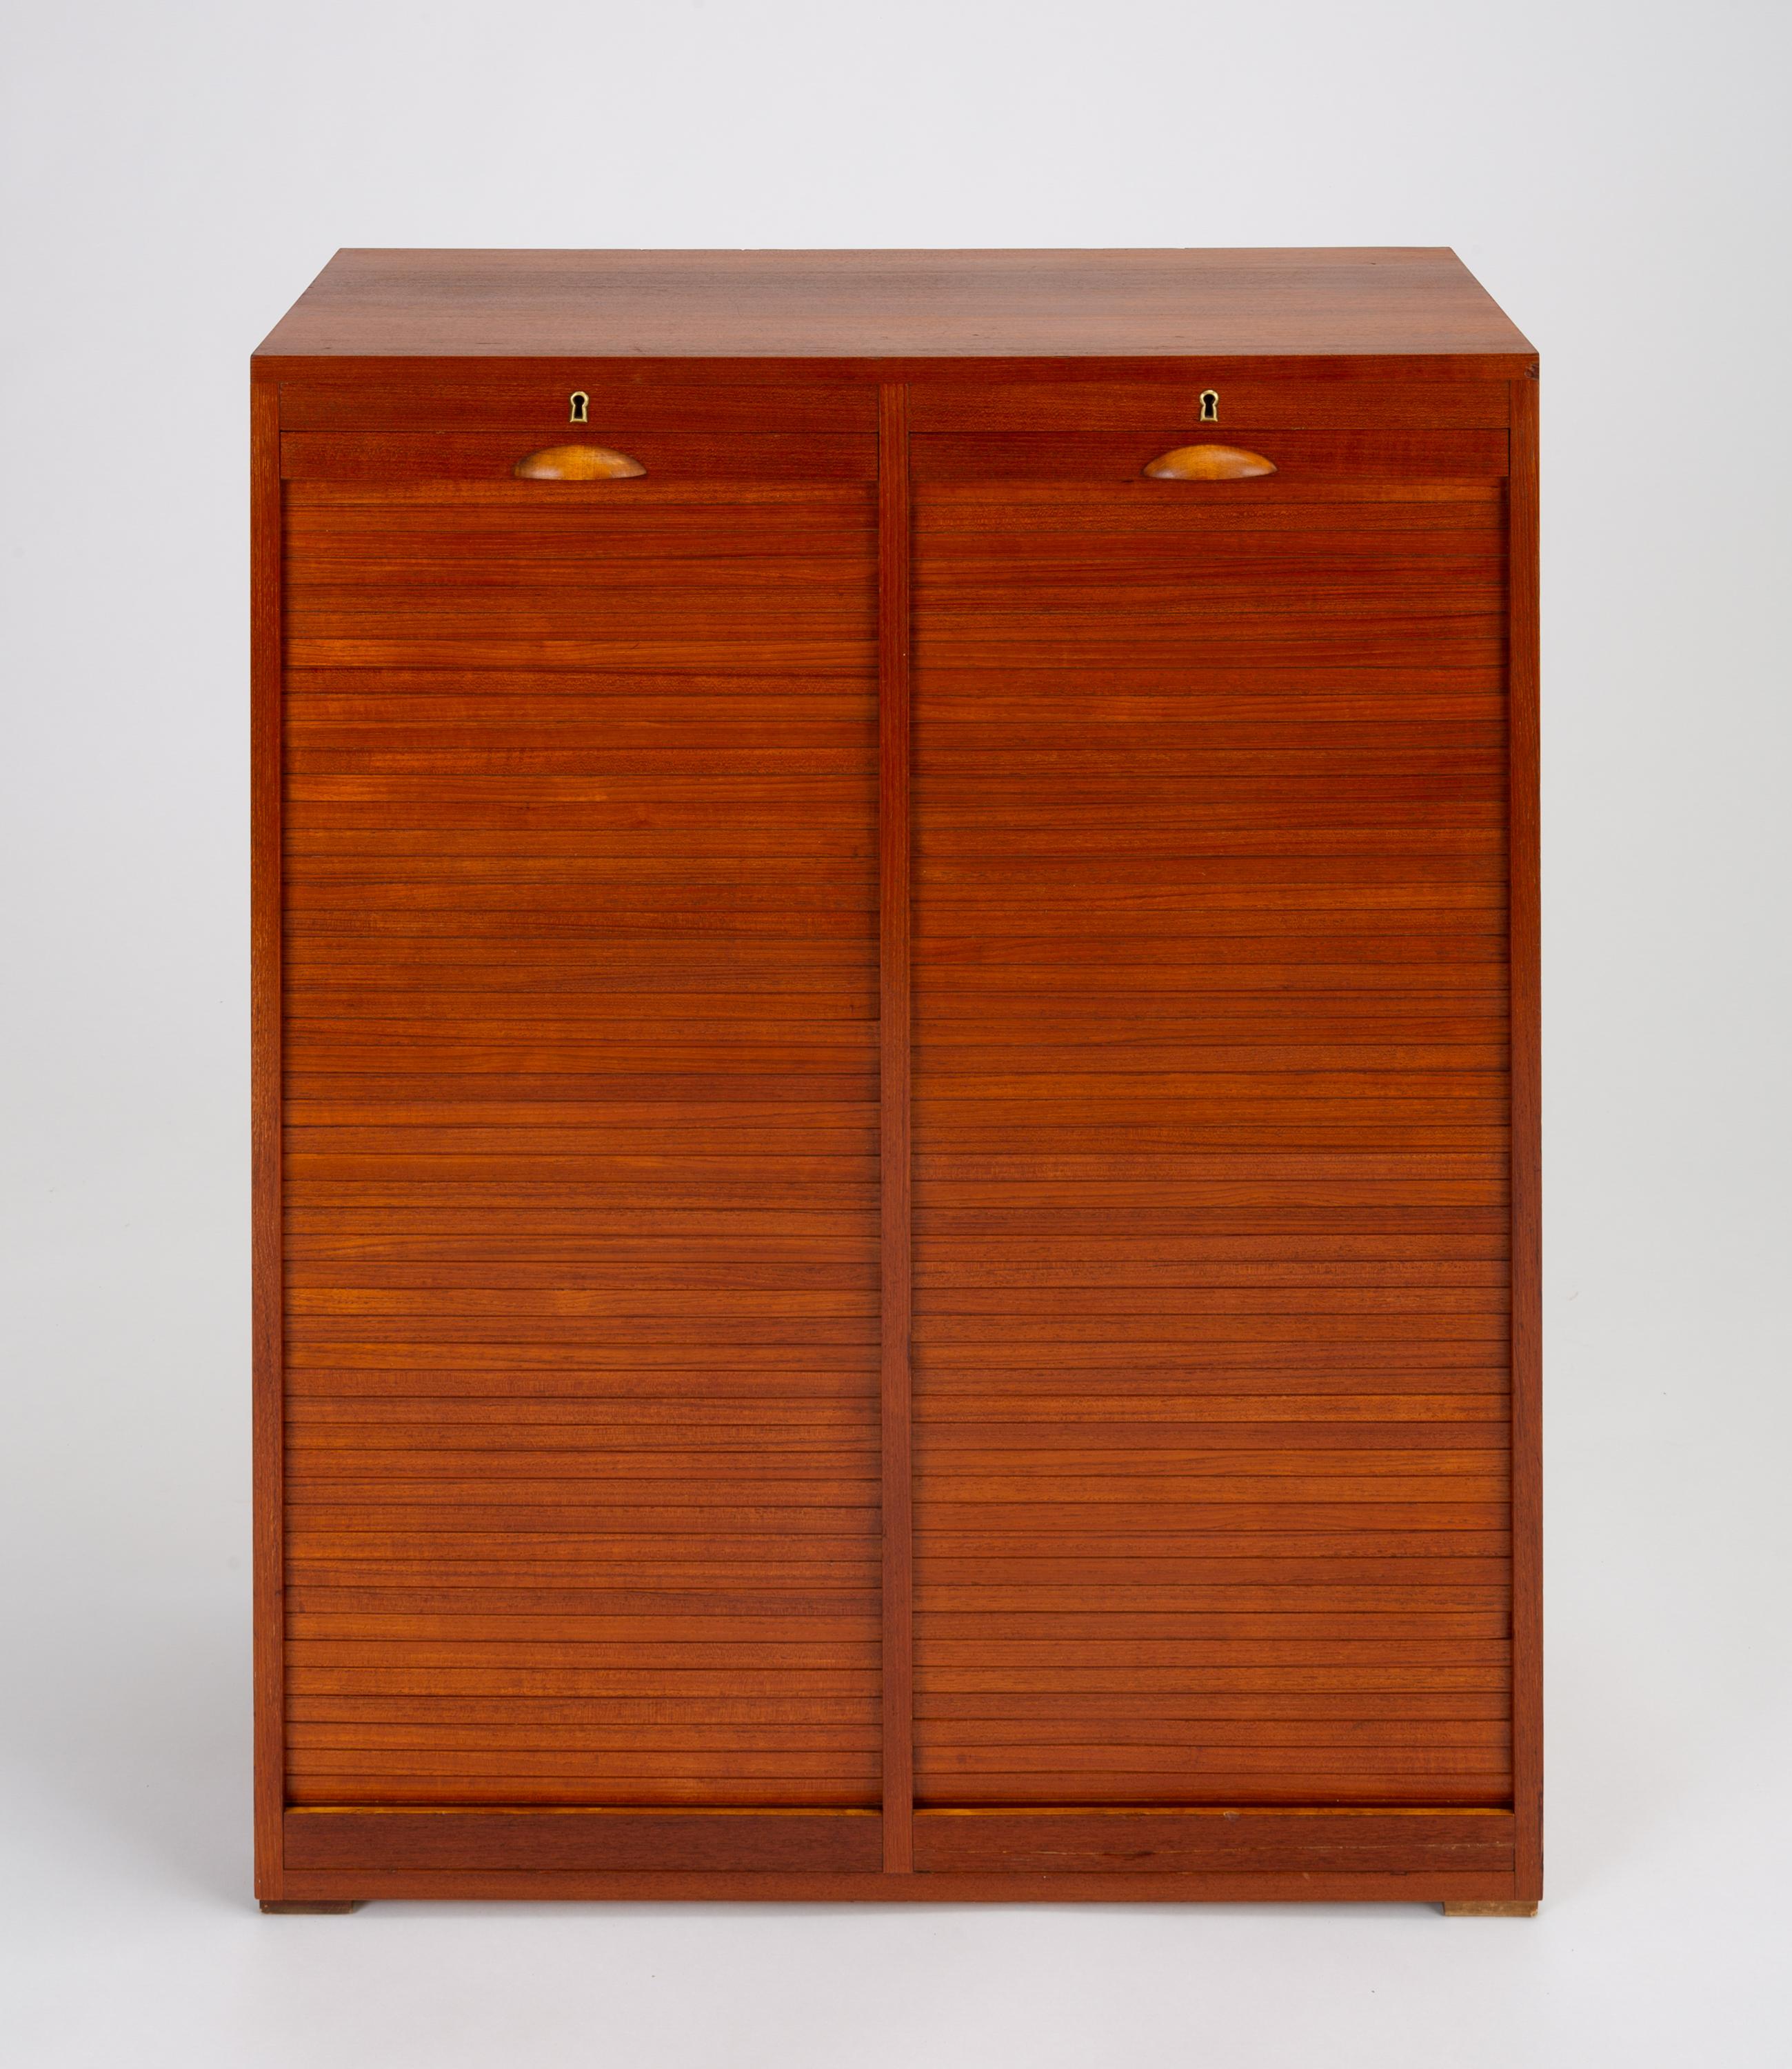 A stately teak filing cabinet with two vertical tambour doors made by Frej-Odense. Each interior space holds ten drawers of solid beech. The drawers are notched on the front panel to accommodate a label. A single skeleton key unlocks both cabinets.